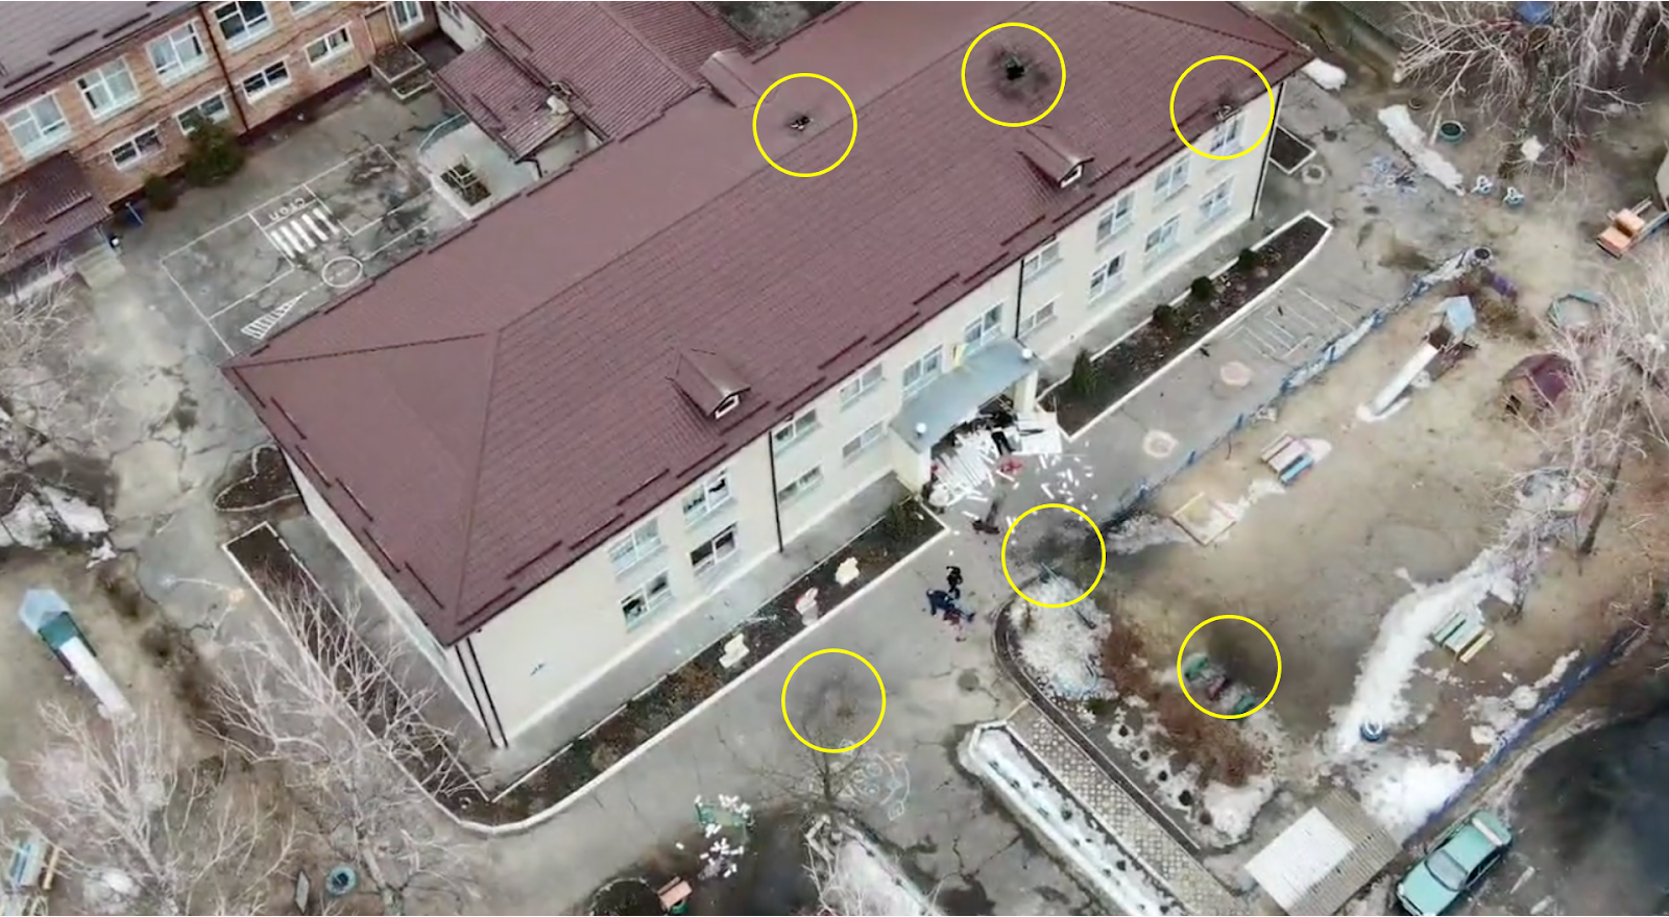 Invasion of Ukraine: Tracking use of Cluster Munitions in Civilian Areas -  bellingcat